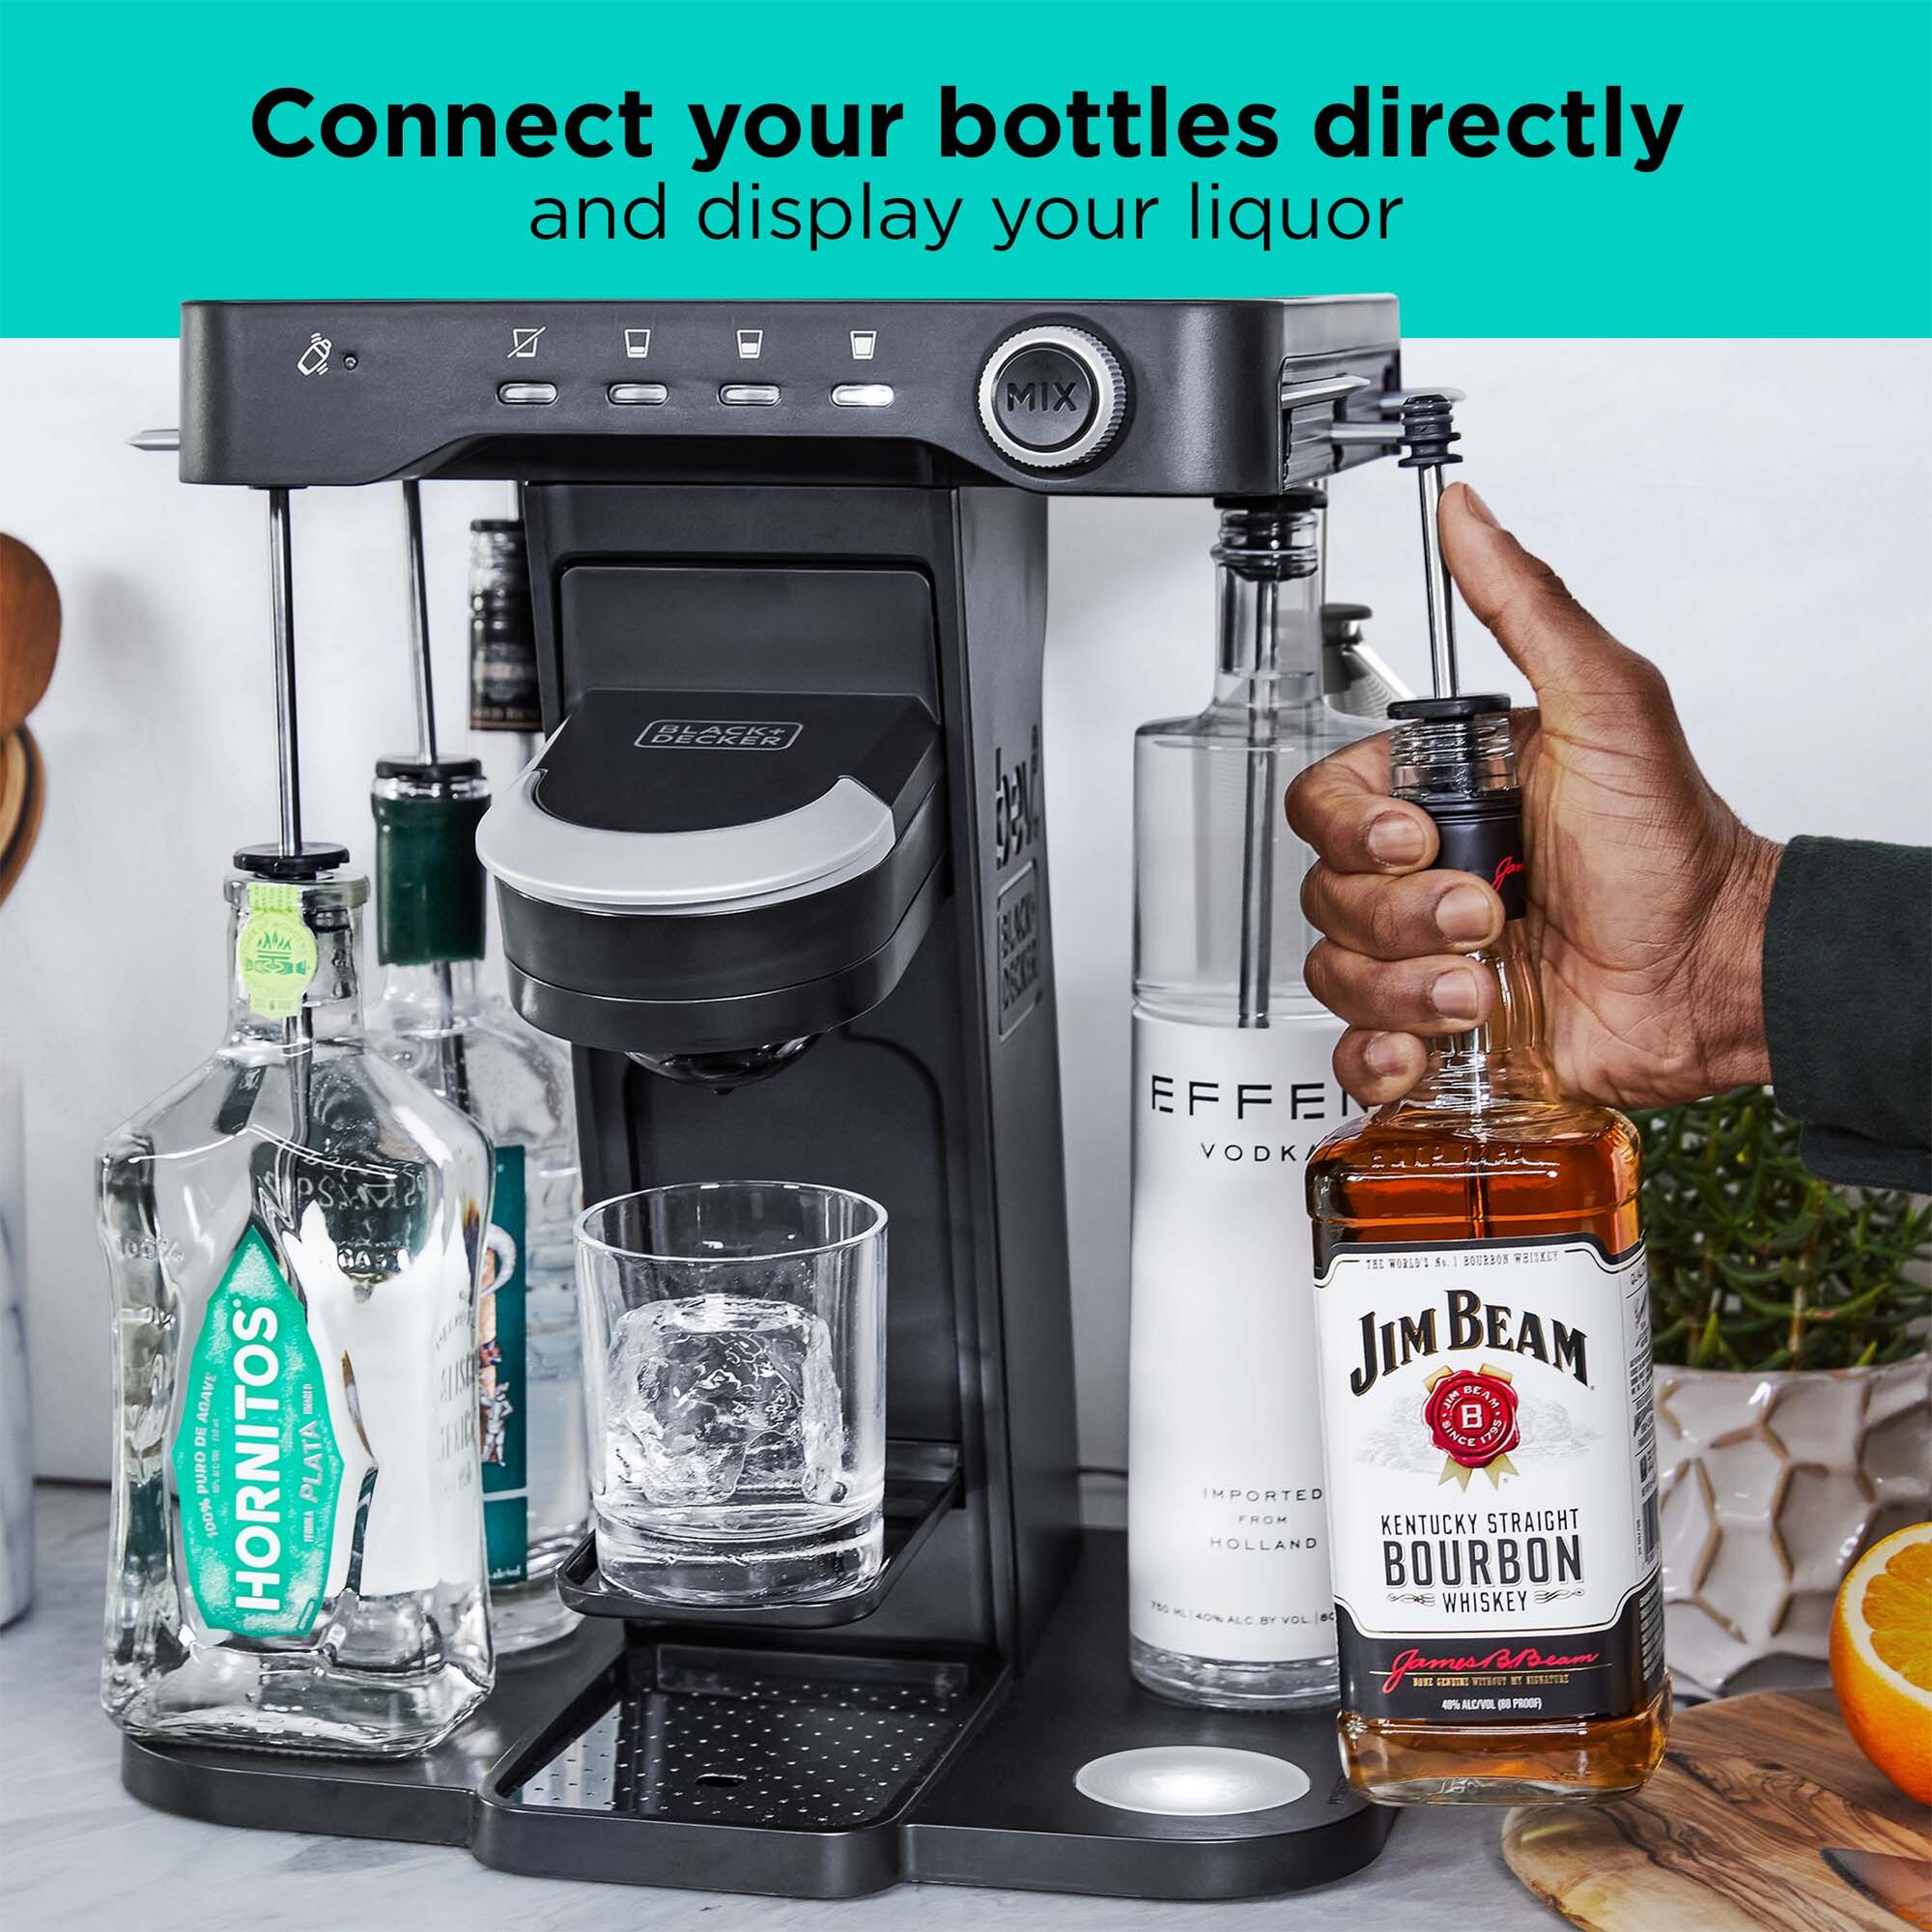 man loading a whiskey bottle on the bev by BLACK+DECKER\u2122 cocktail maker with text that reads 